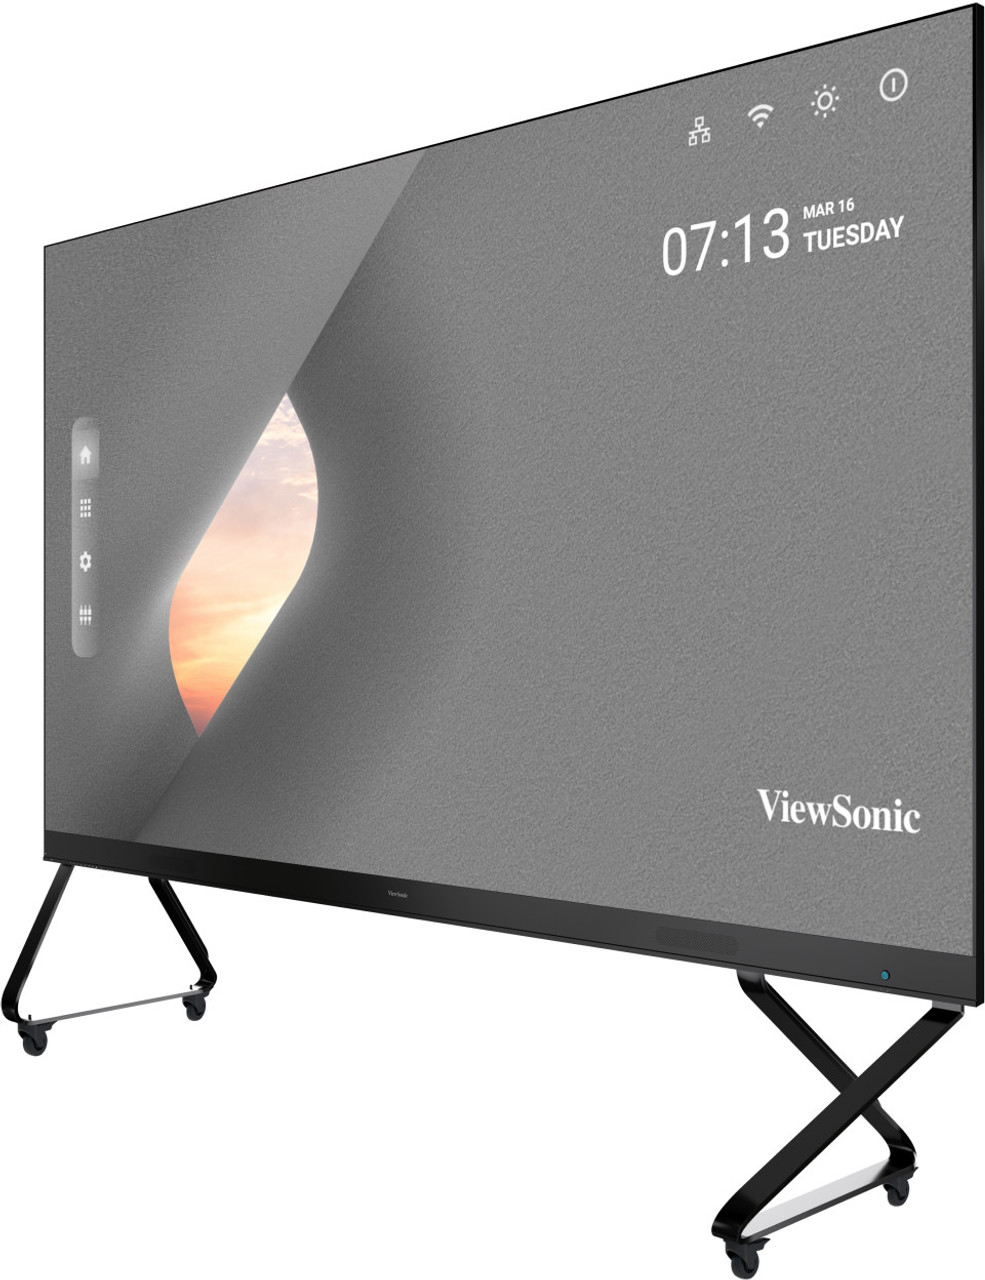 ViewSonic LDM-135-151 135" 600 Nits 24/7 All-in-One Direct View LED Display